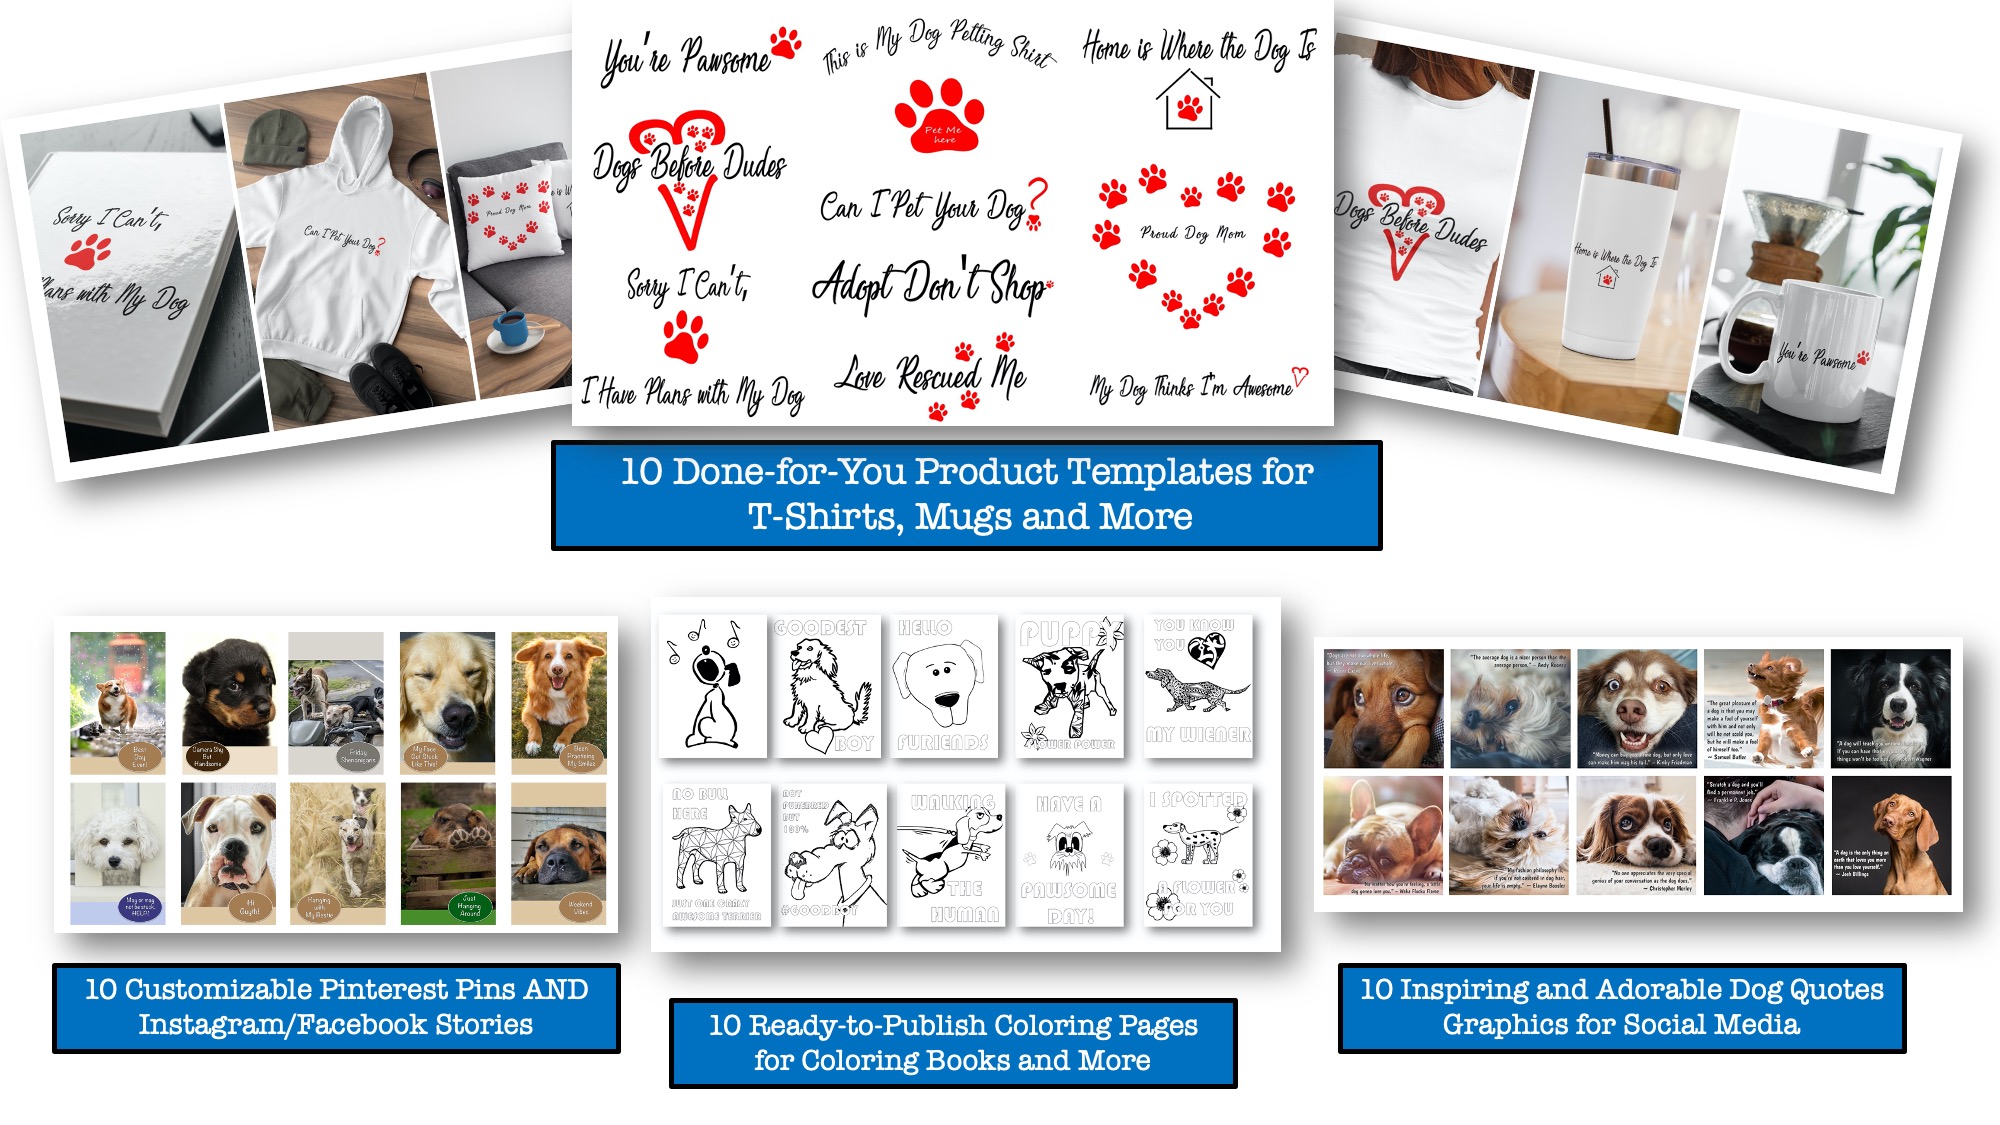 Product & Social Media Templates for the Dog Niche with PLR Rights